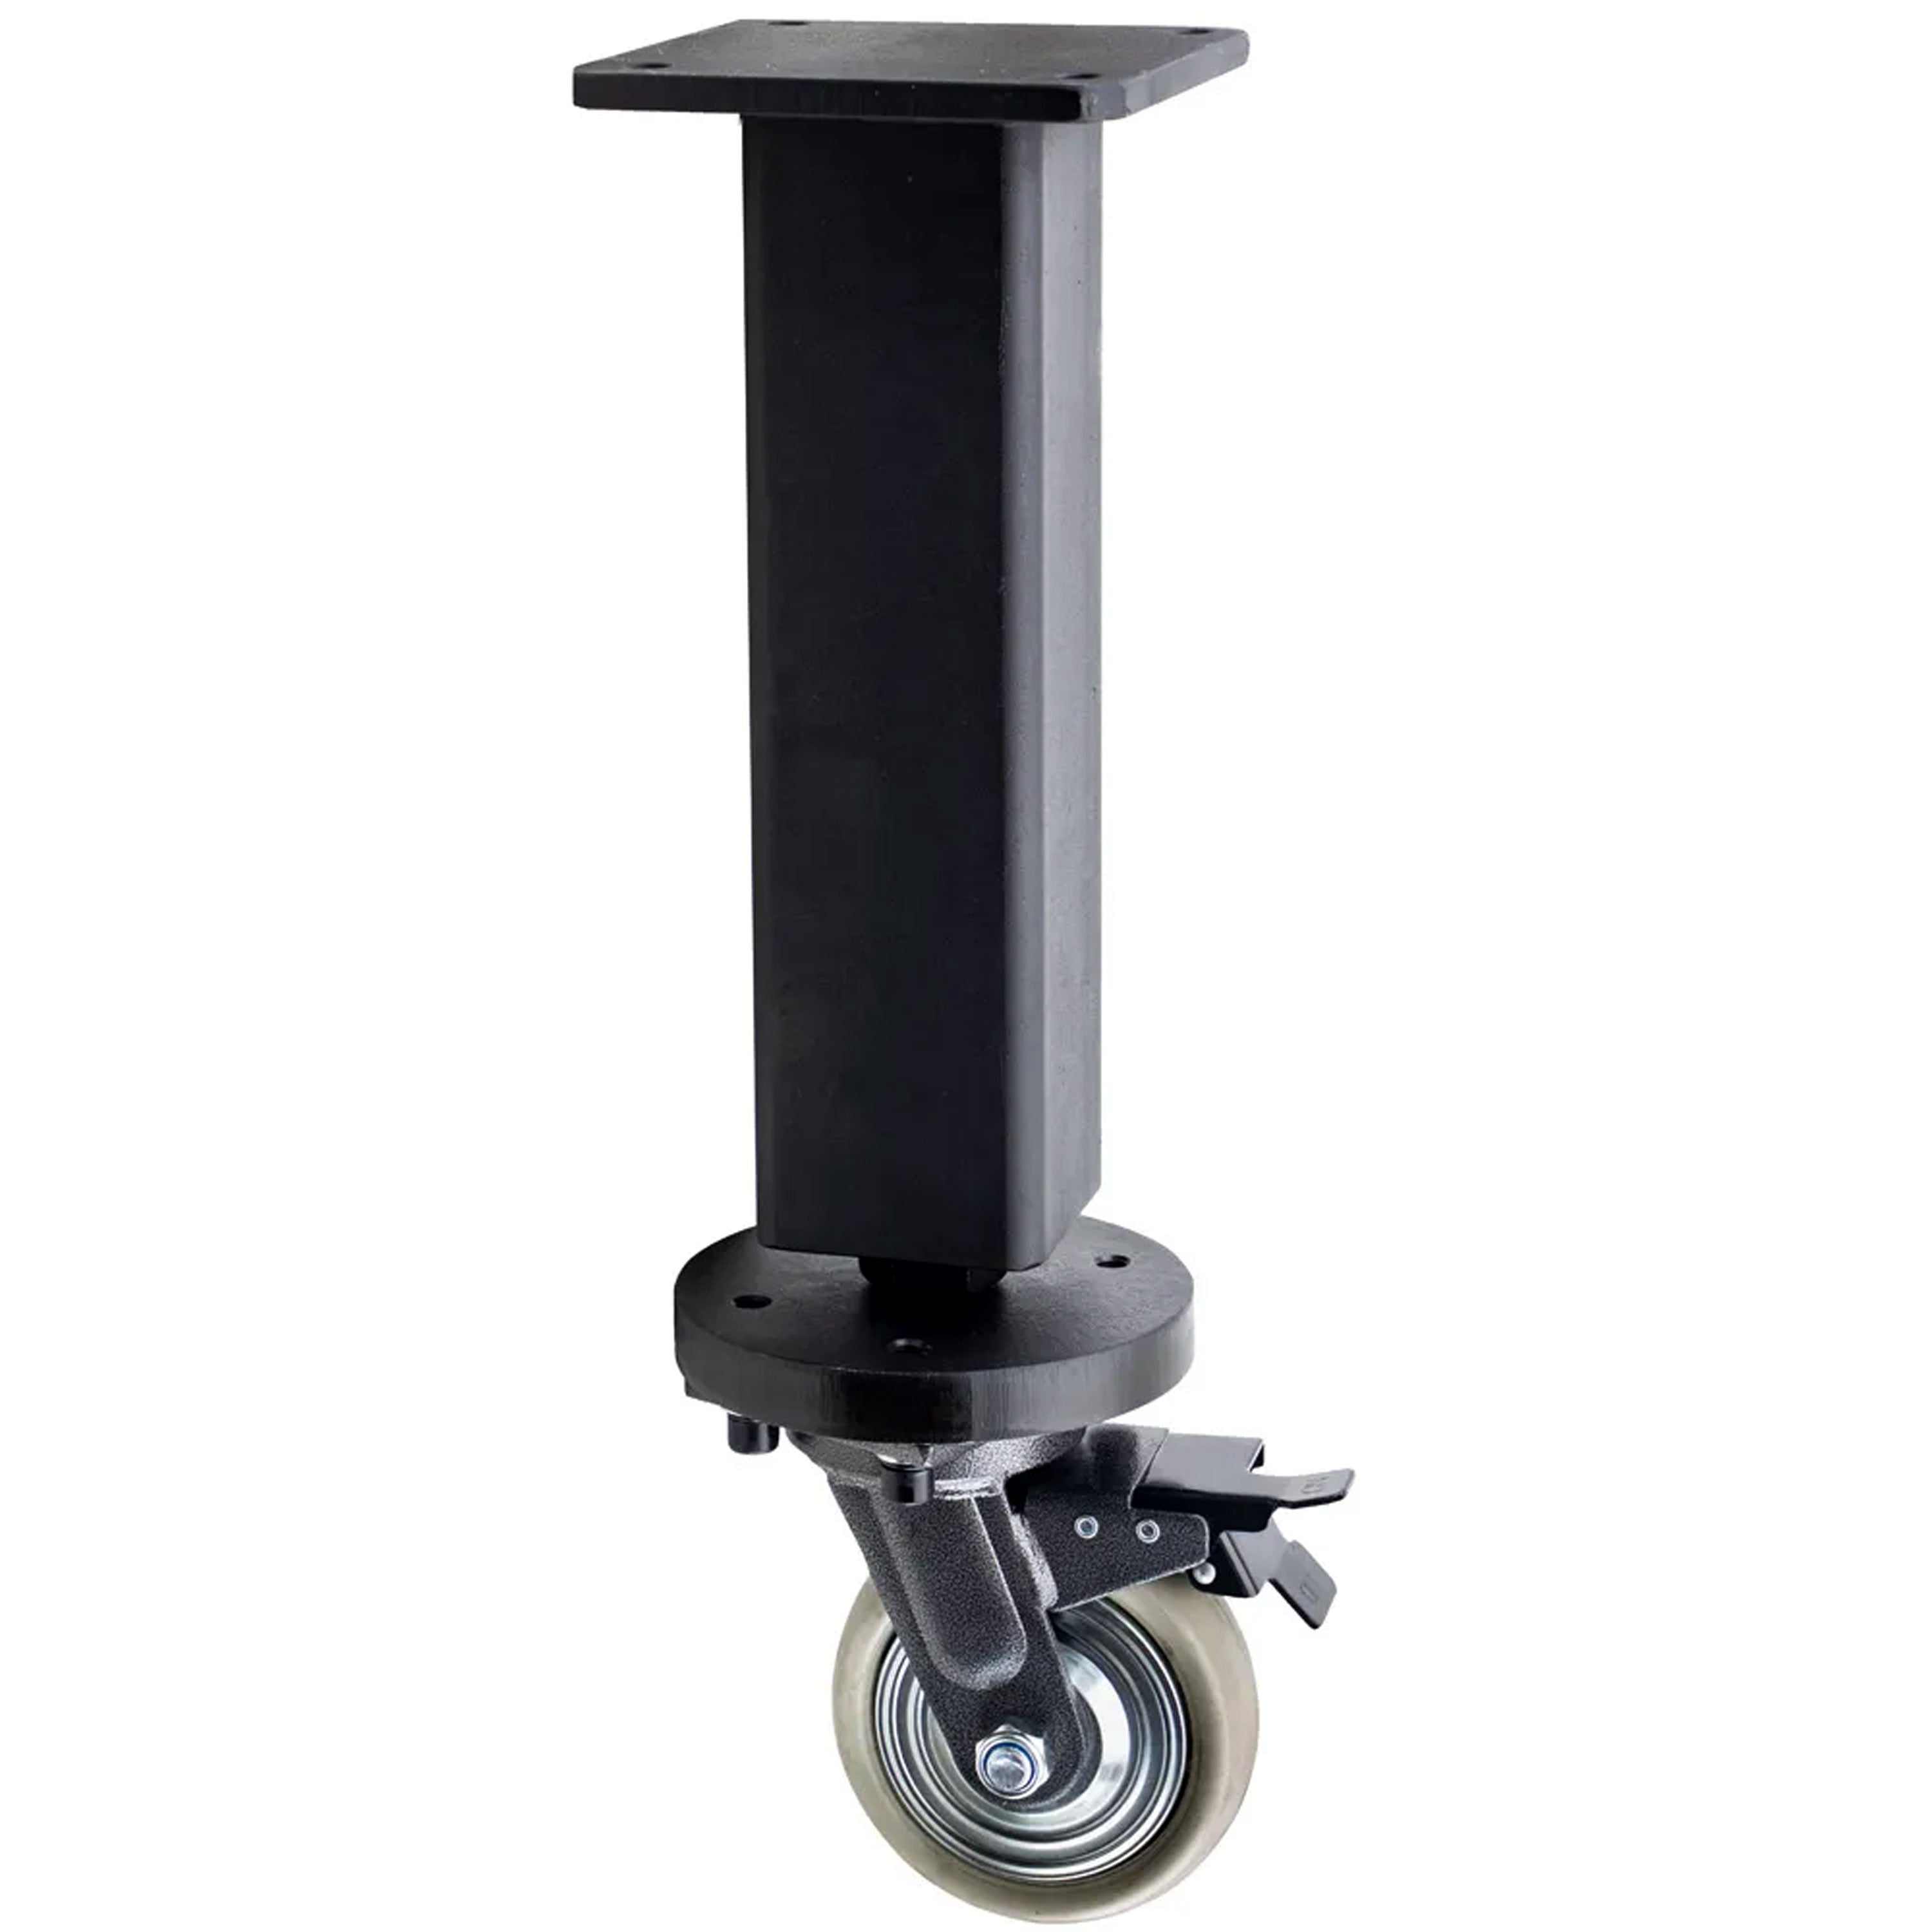 Leg, Fixed Height with Casters, 26" (Single)